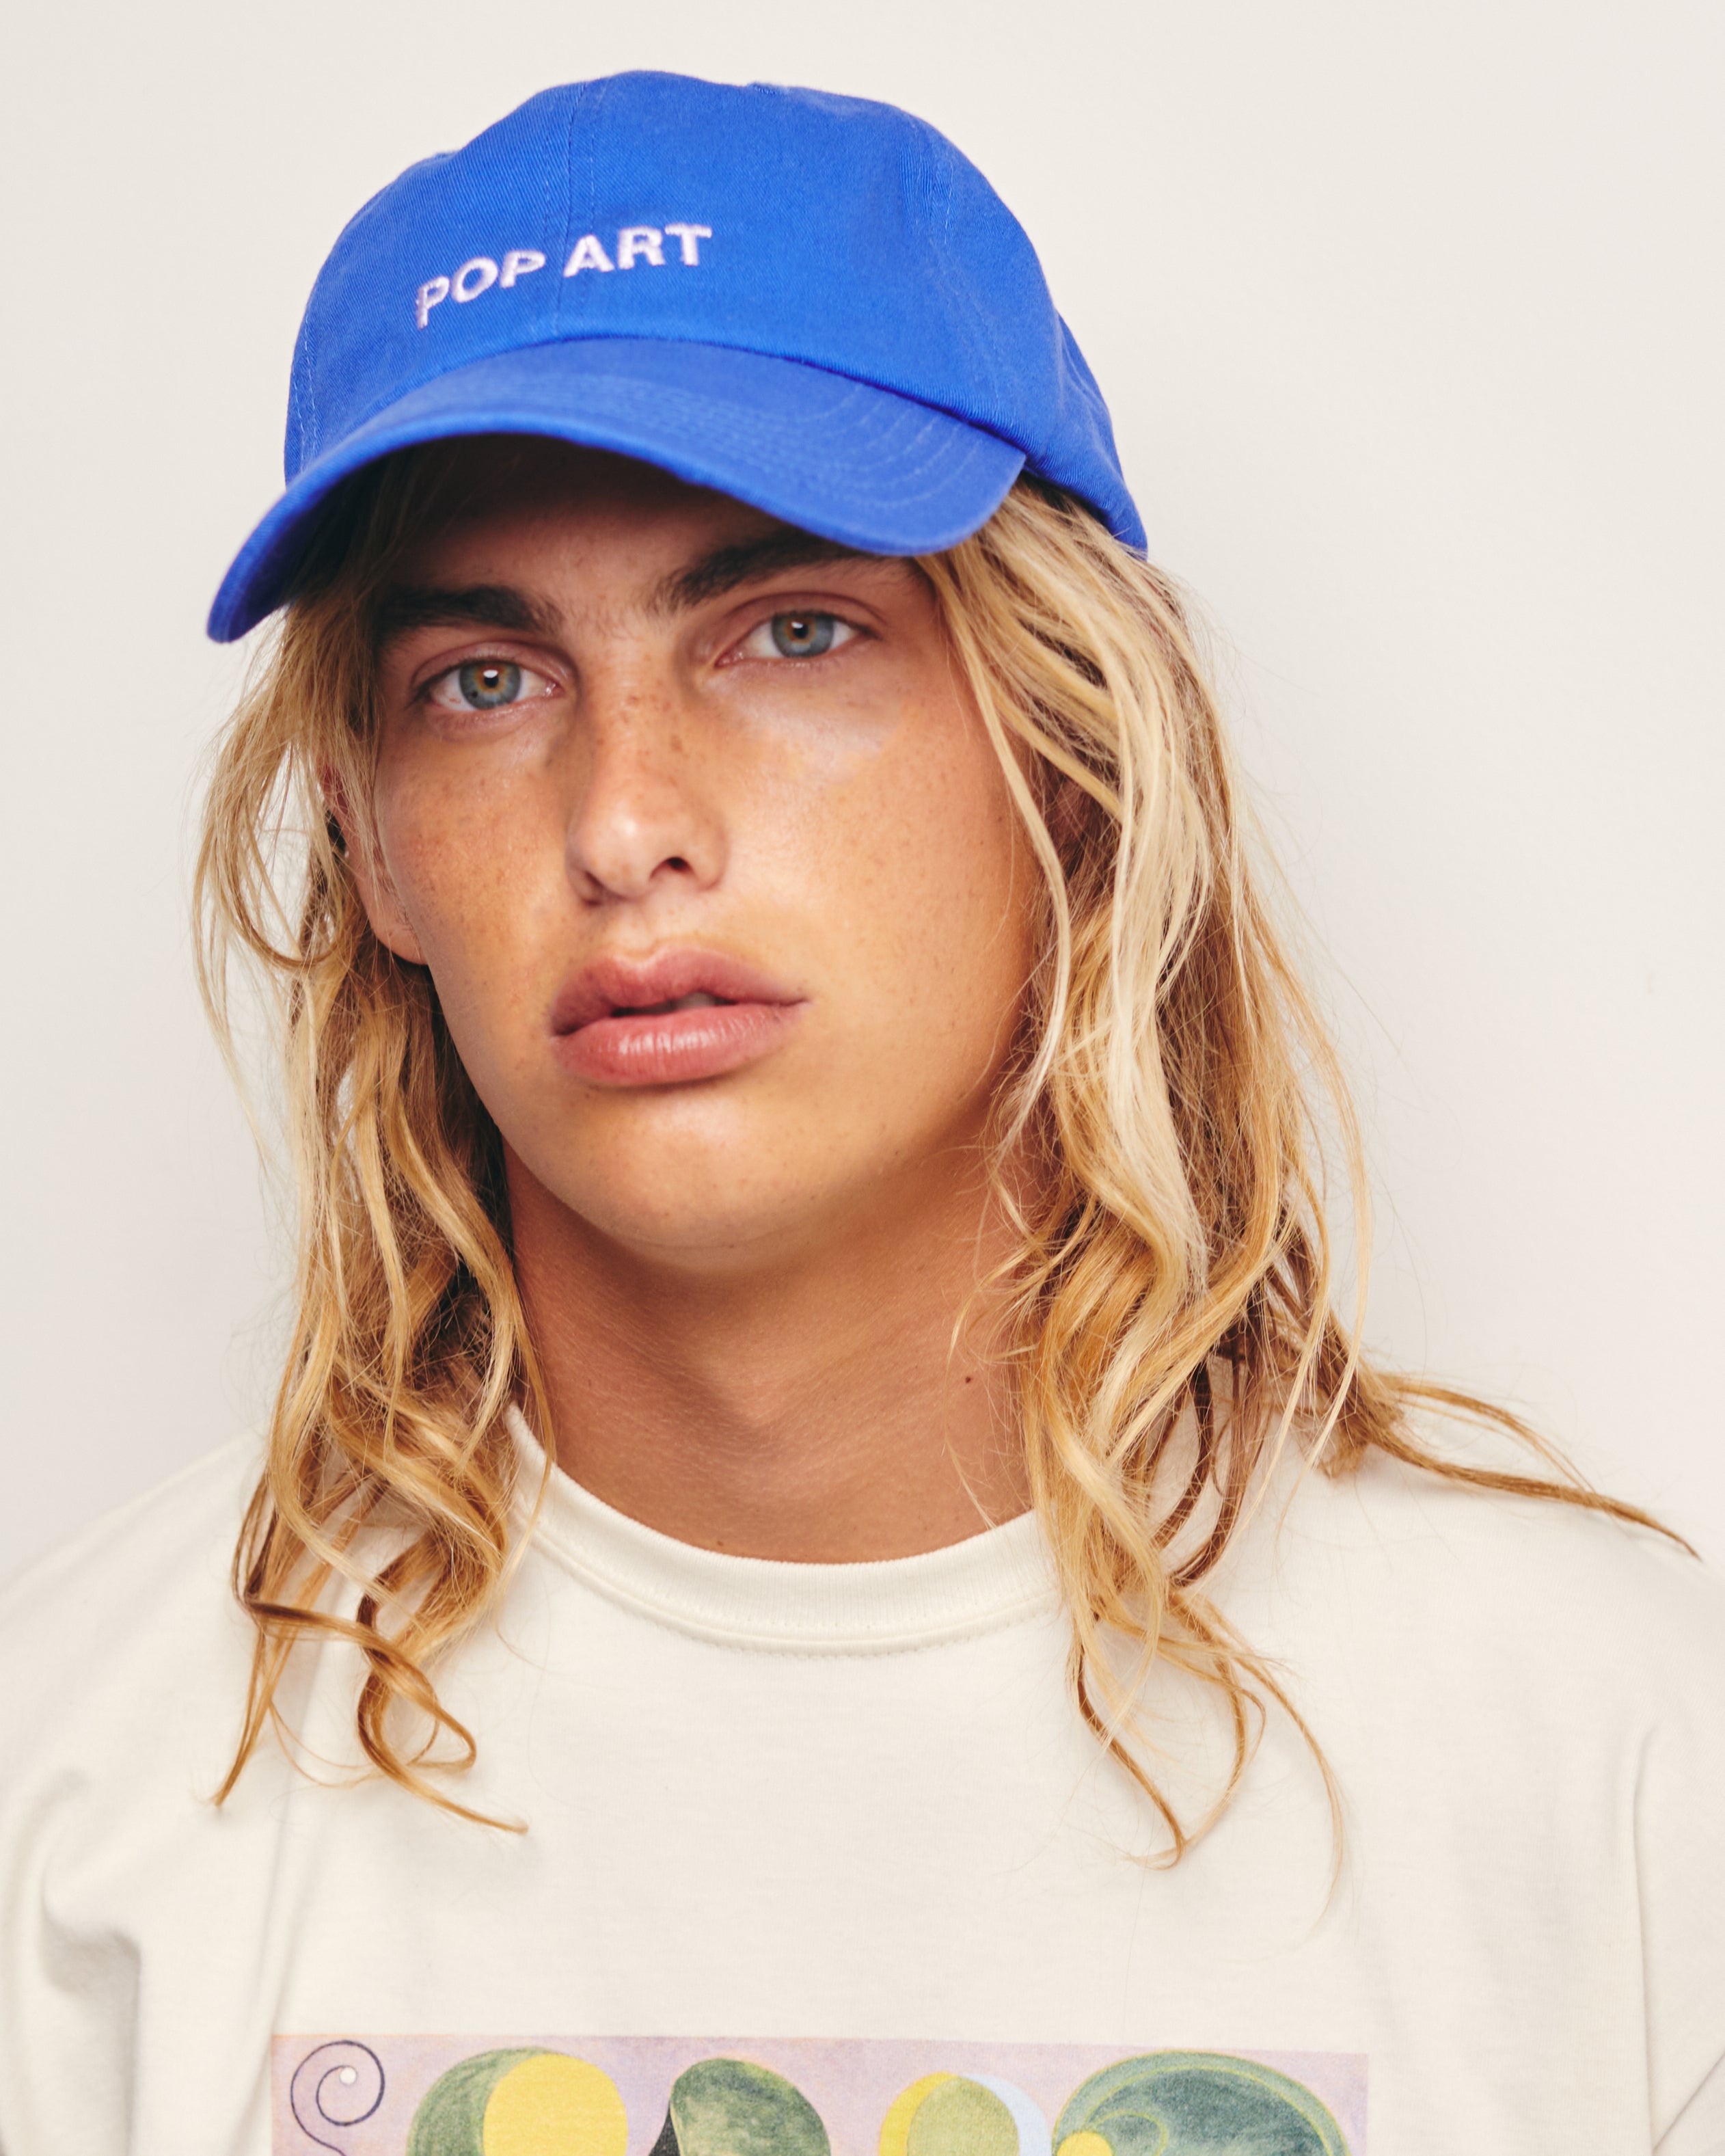 Lucas Ucedo wears Blue  Baseball Cap / Dad Hat with Pop Art Movement Text Embroidery on Front. 100% Cotton.